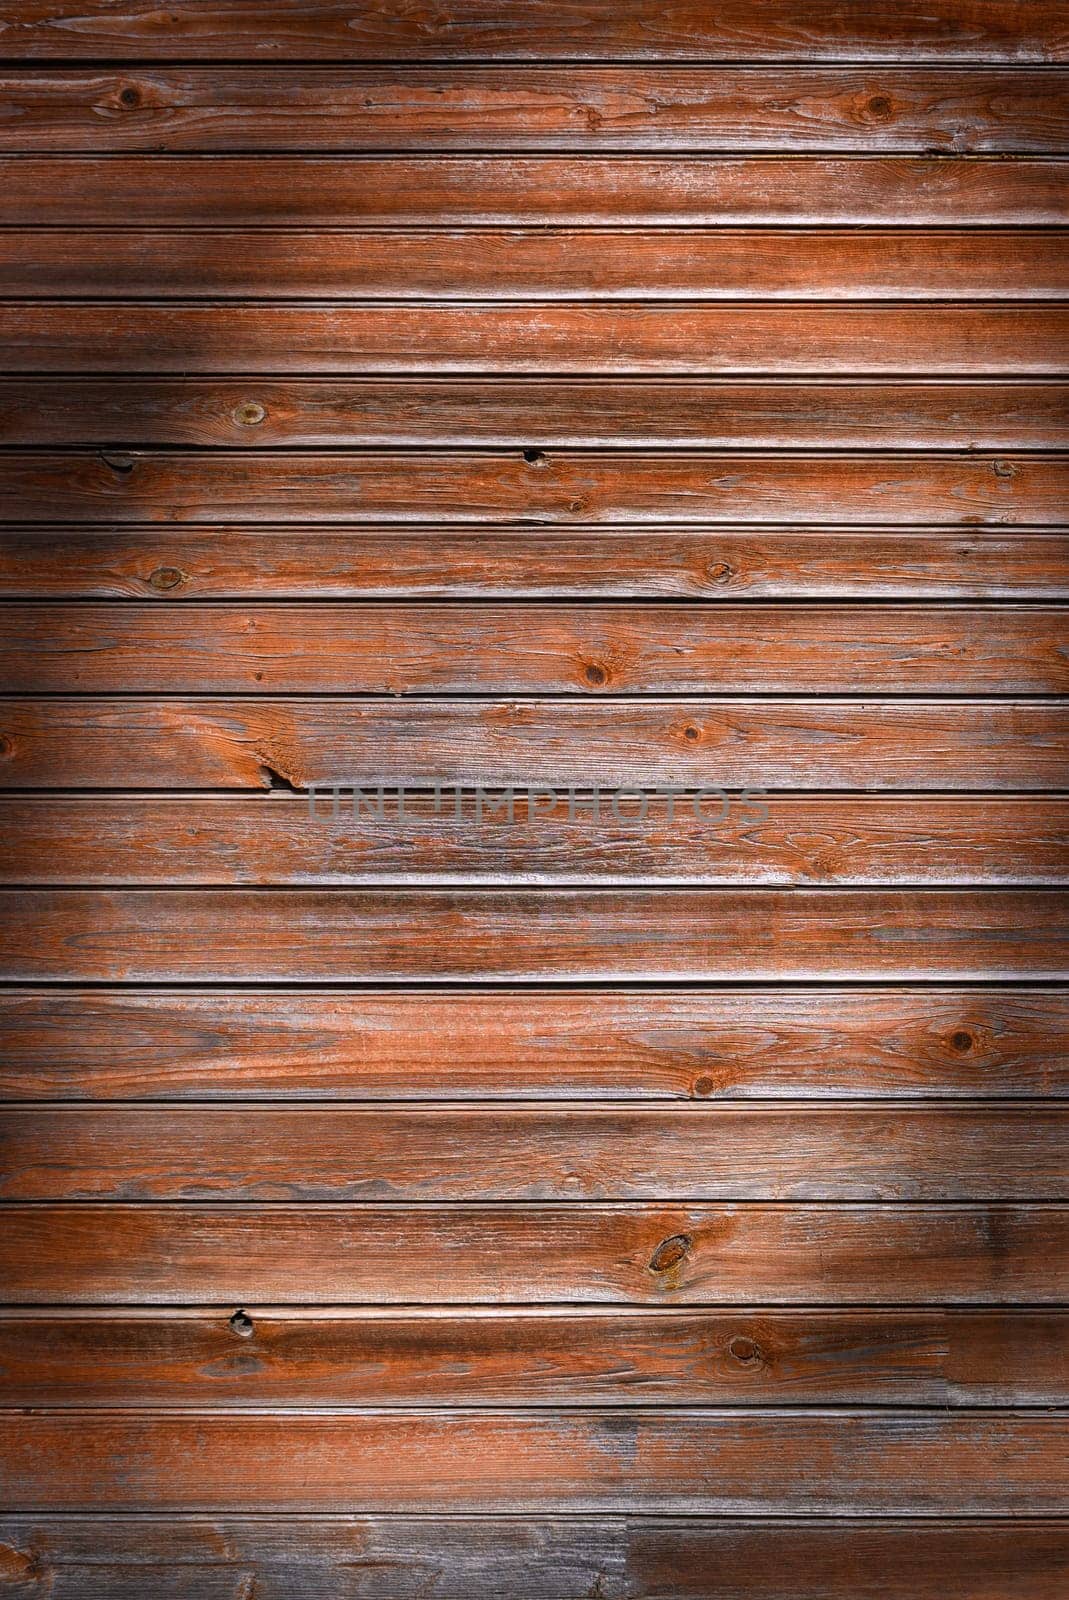 A distressed barn wood backdrop showcasing weathered, distressed planks and nostalgic rustic charm.4 by Mixa74